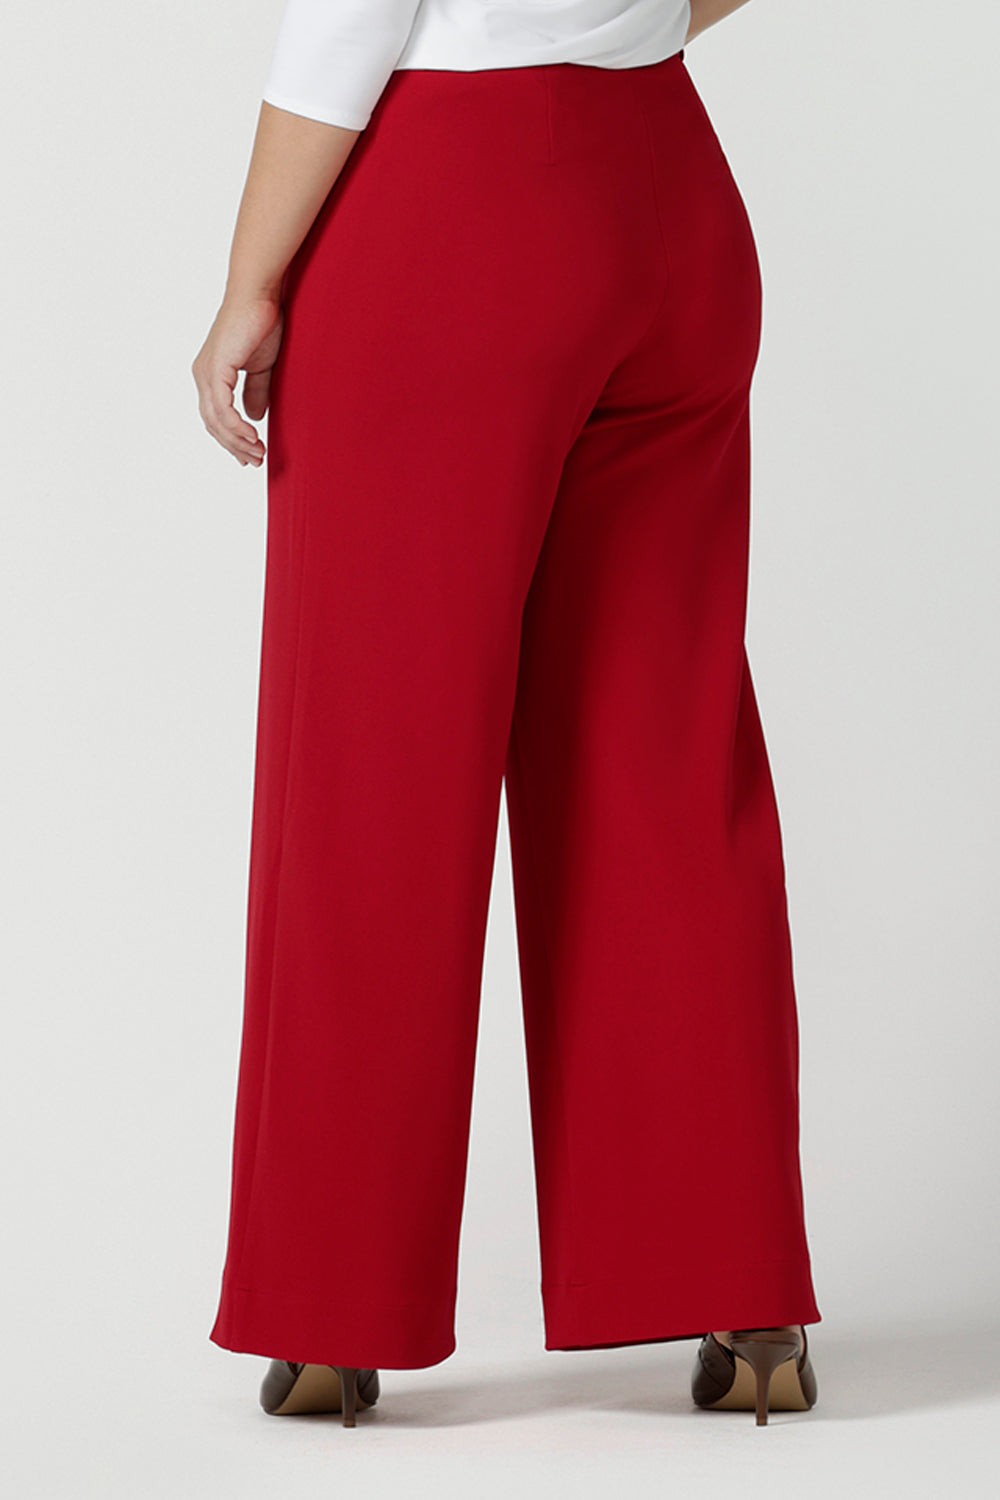 Back view of a size 10 woman wears the Drew pant in red, high waist and invisible fly front. Tailored belt loops and wide leg. Made in Australia for women. Stylish corporate wear for women. Made in Australia size 8 - 24.